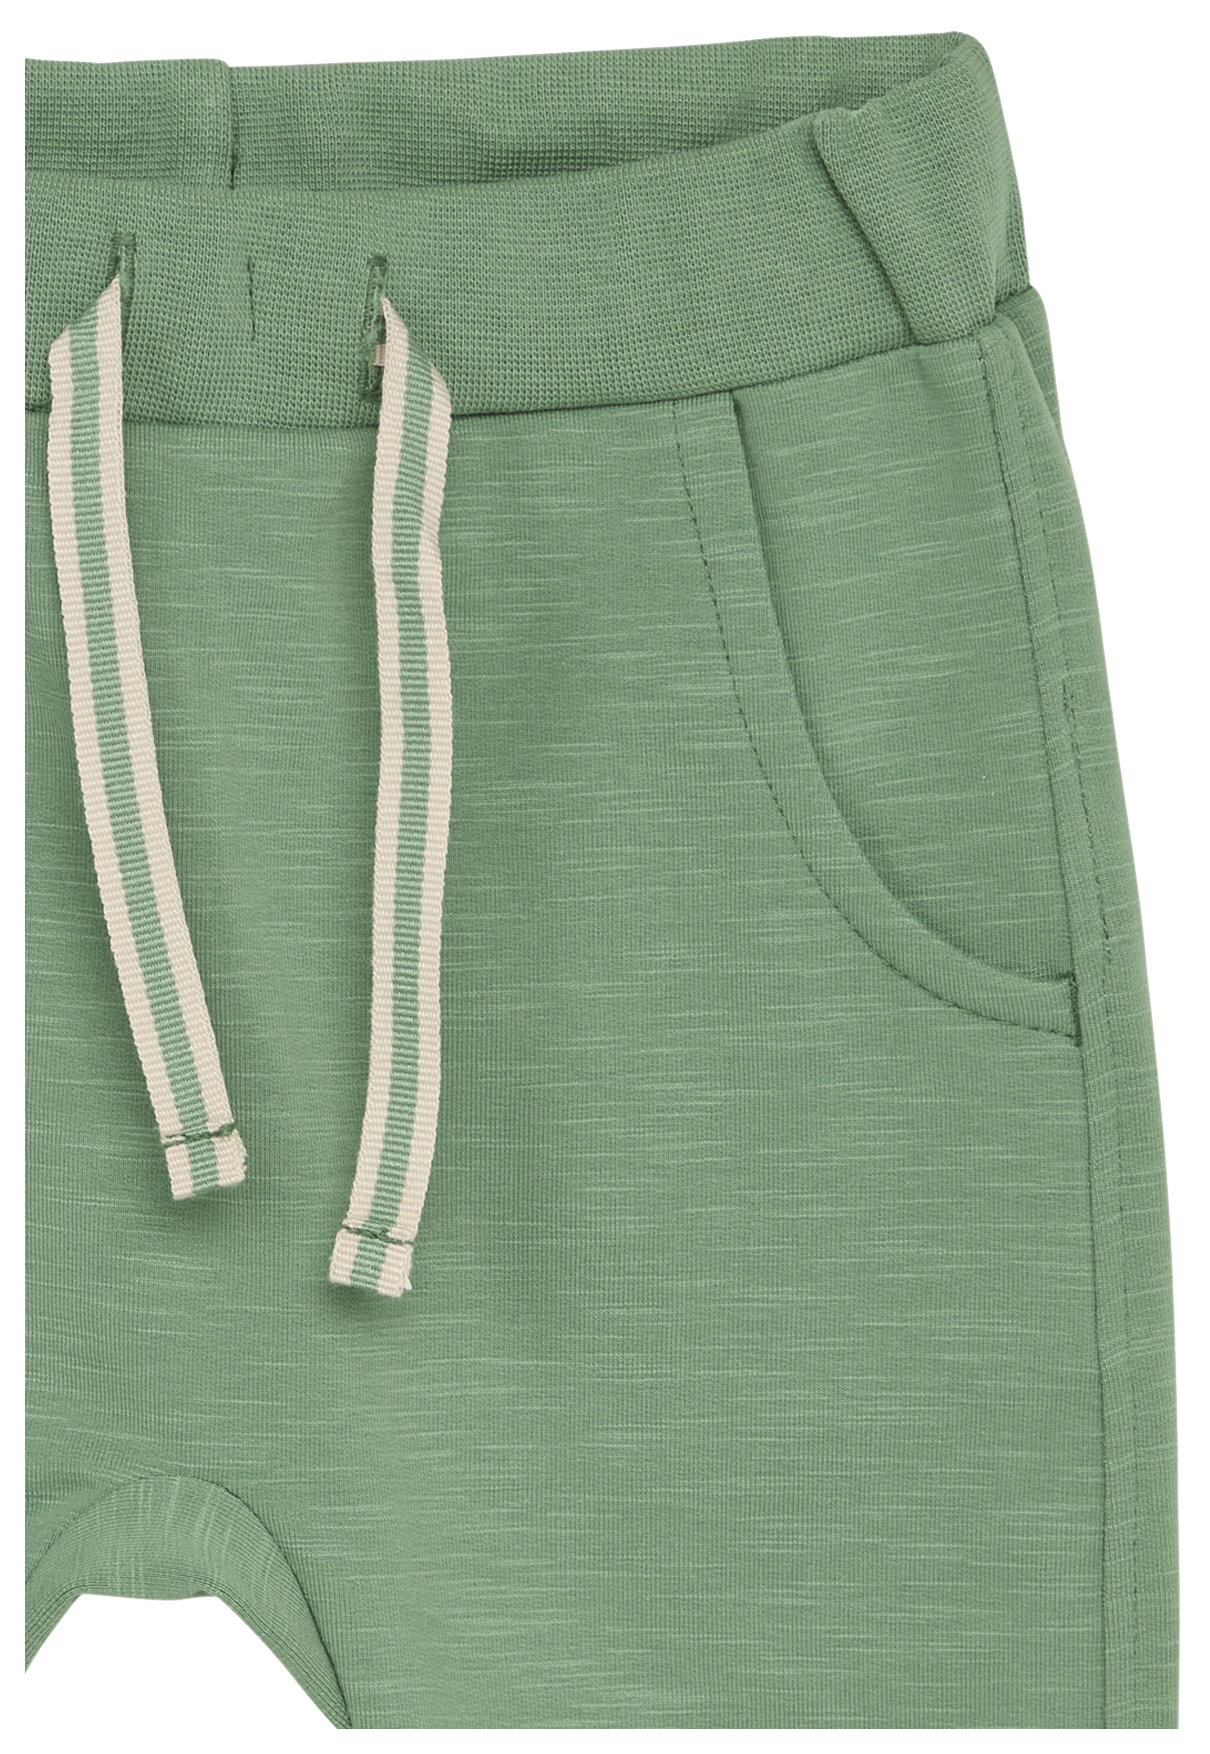 Hust & Claire G Joggingtrousers Spruce